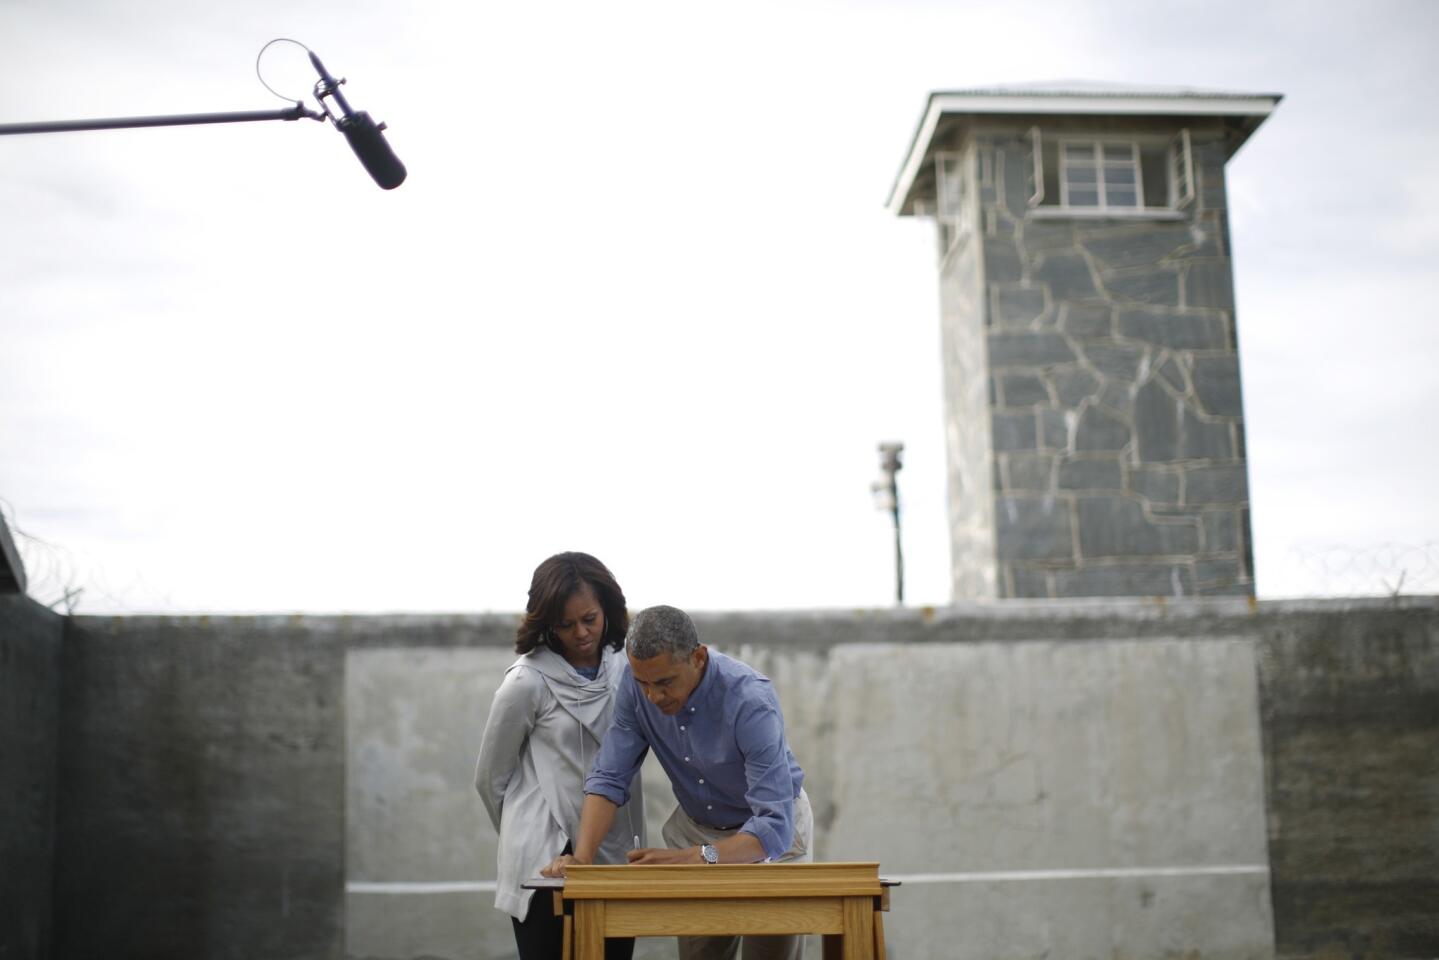 U.S. President Obama writes in a guest book as he tours Robben Island with the First lady near Cape Town